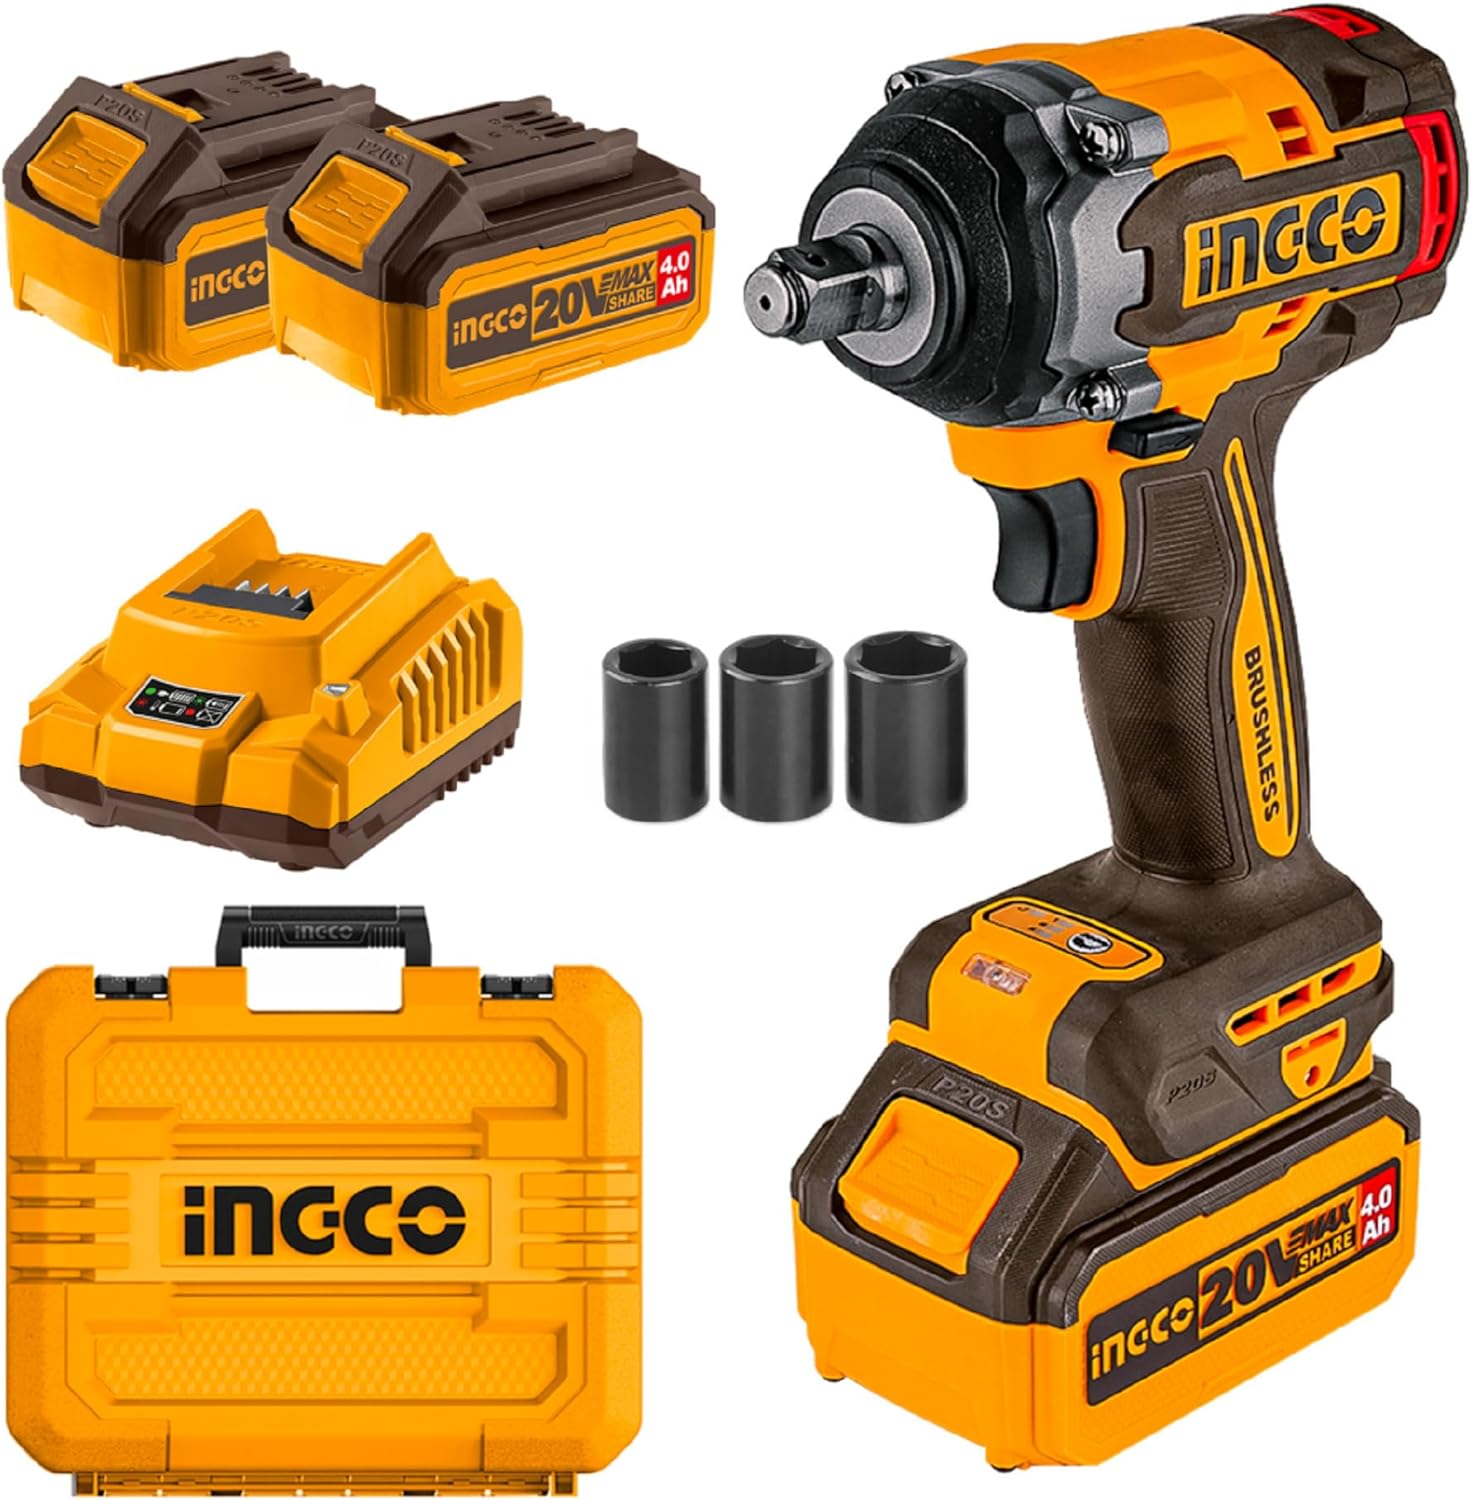 Boost your mechanical projects with the Ingco 1/2" Lithium-Ion Cordless Impact Wrench. Featuring two 20V 4.0Ah batteries and a charger, this high-torque tool offers efficiency and power. Get yours at SupplyMaster.store Ghana! Impact Wrench & Driver Buy Tools hardware Building materials